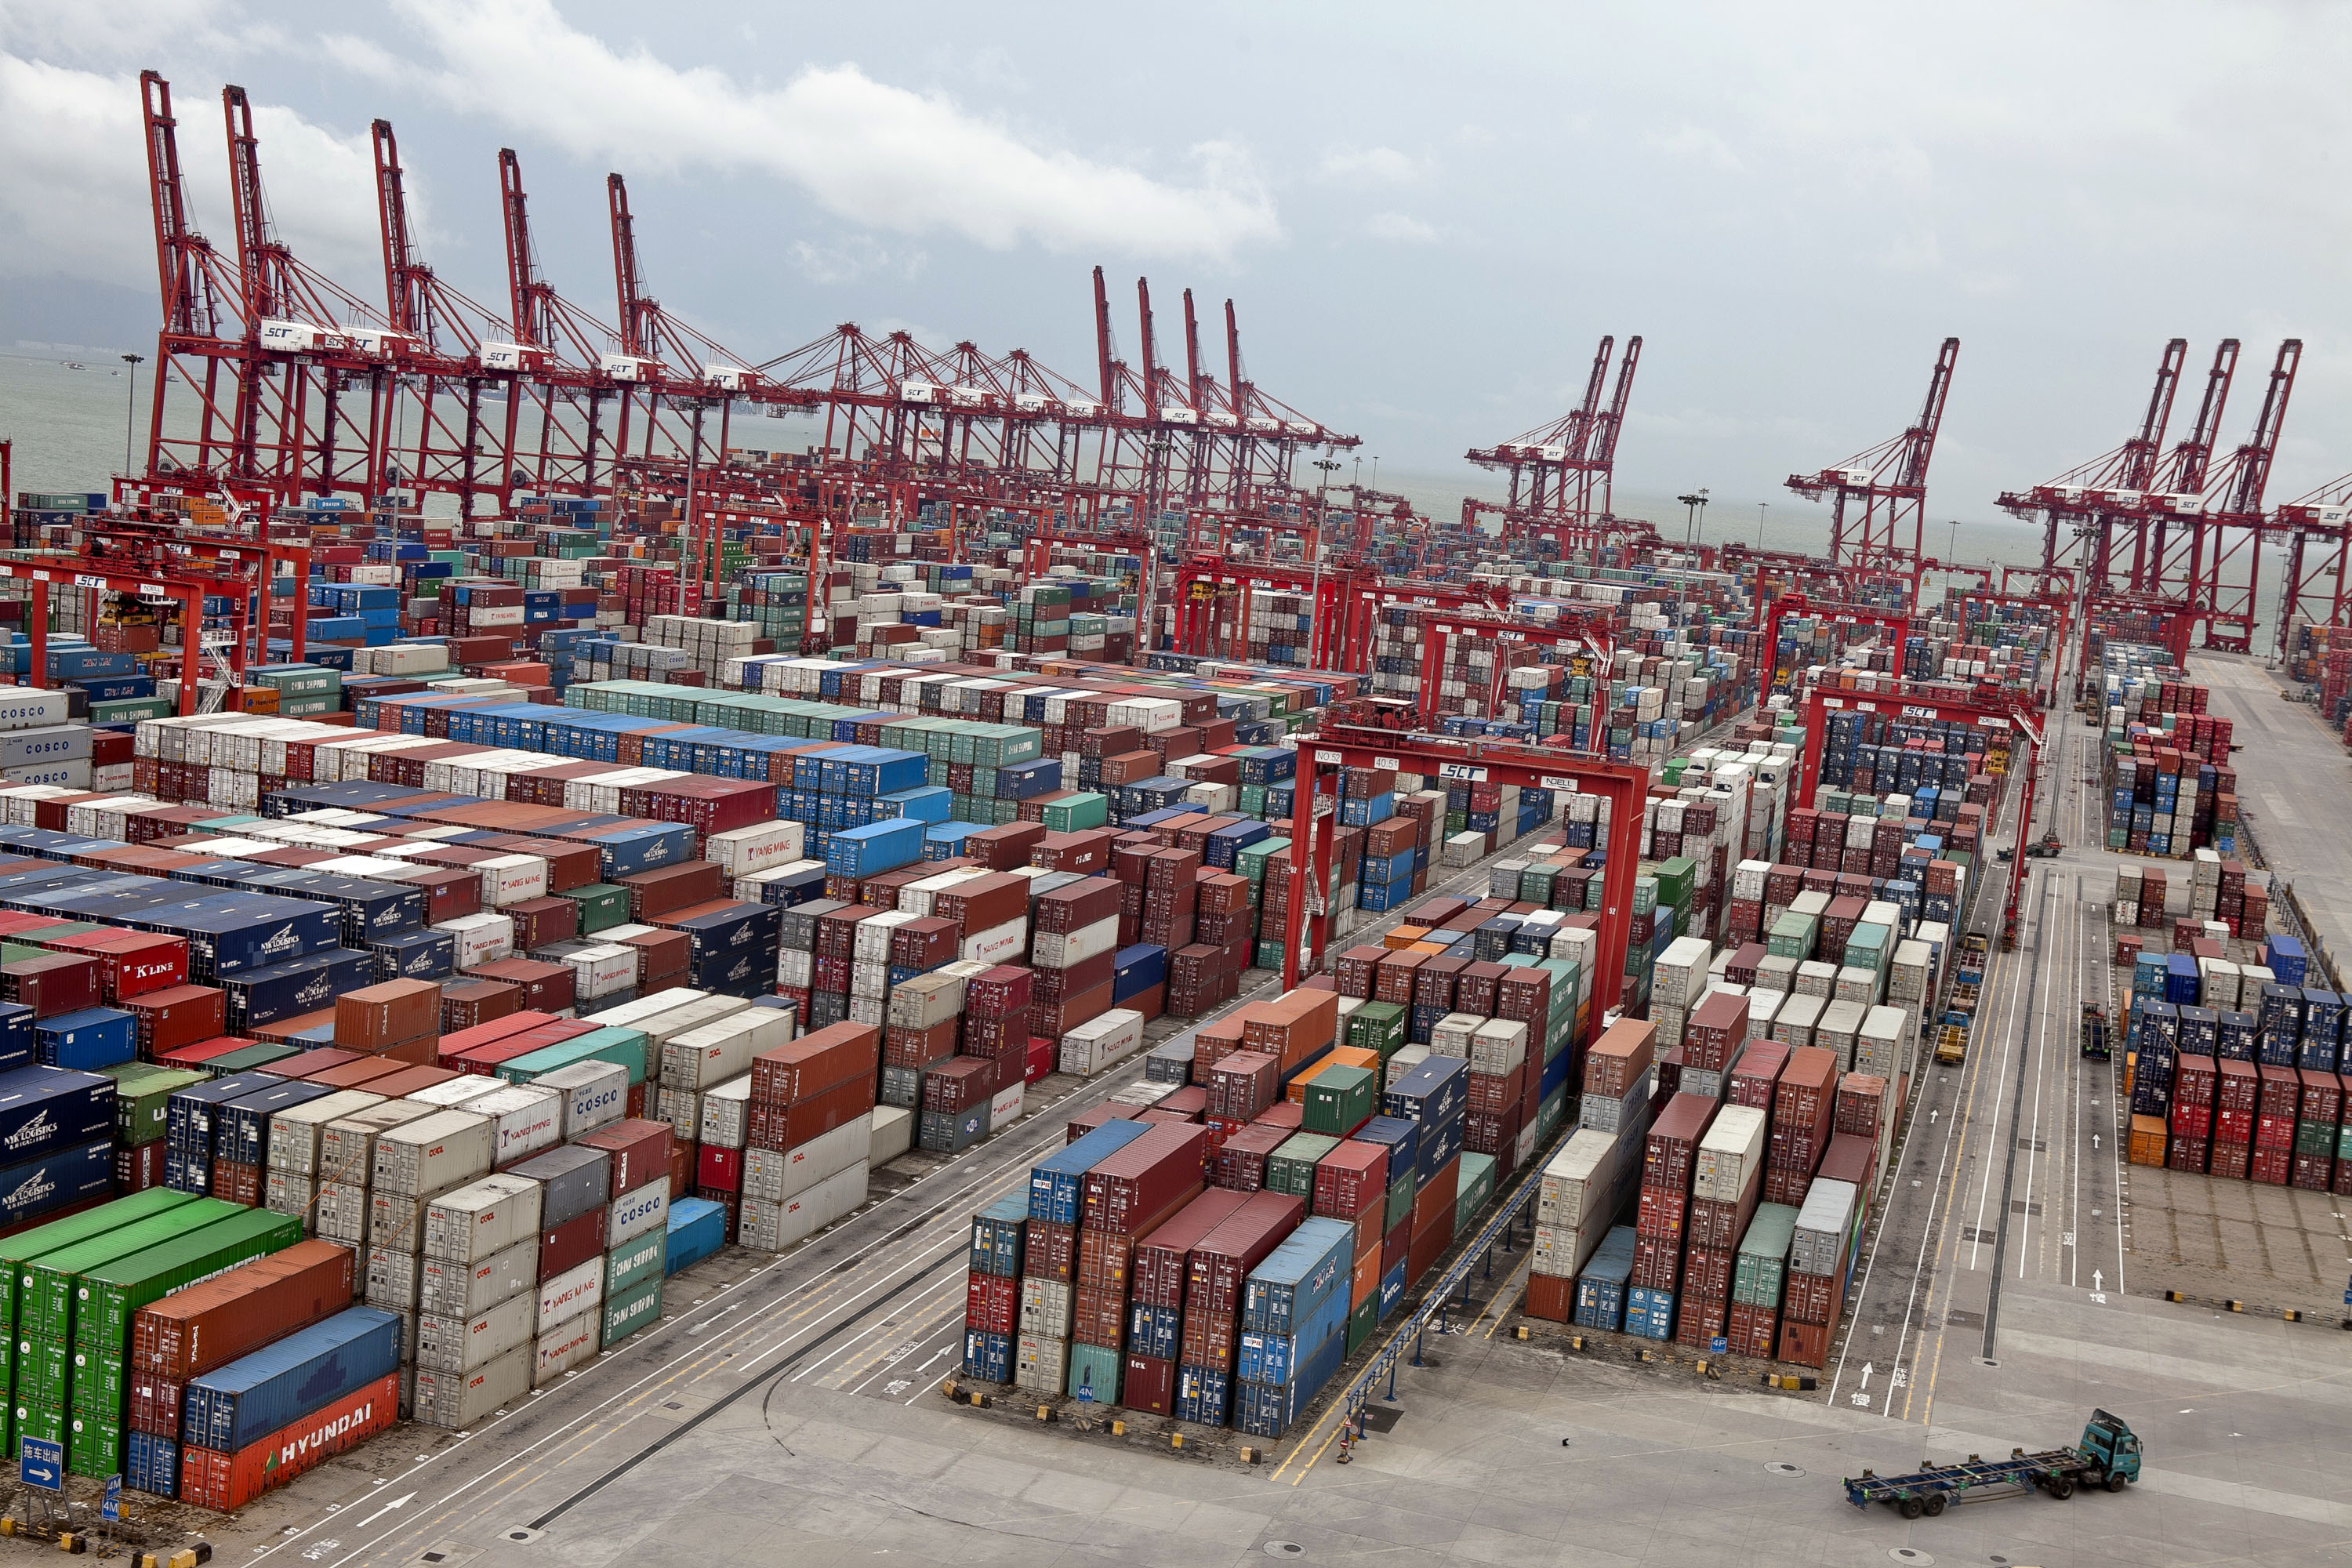 China Merchants handled 38.52 million teu of containerised cargoes in the first half, up 18.1 per cent year on year. Throughput for bulk cargoes rose 2.6 per cent. Photo: Bloomberg